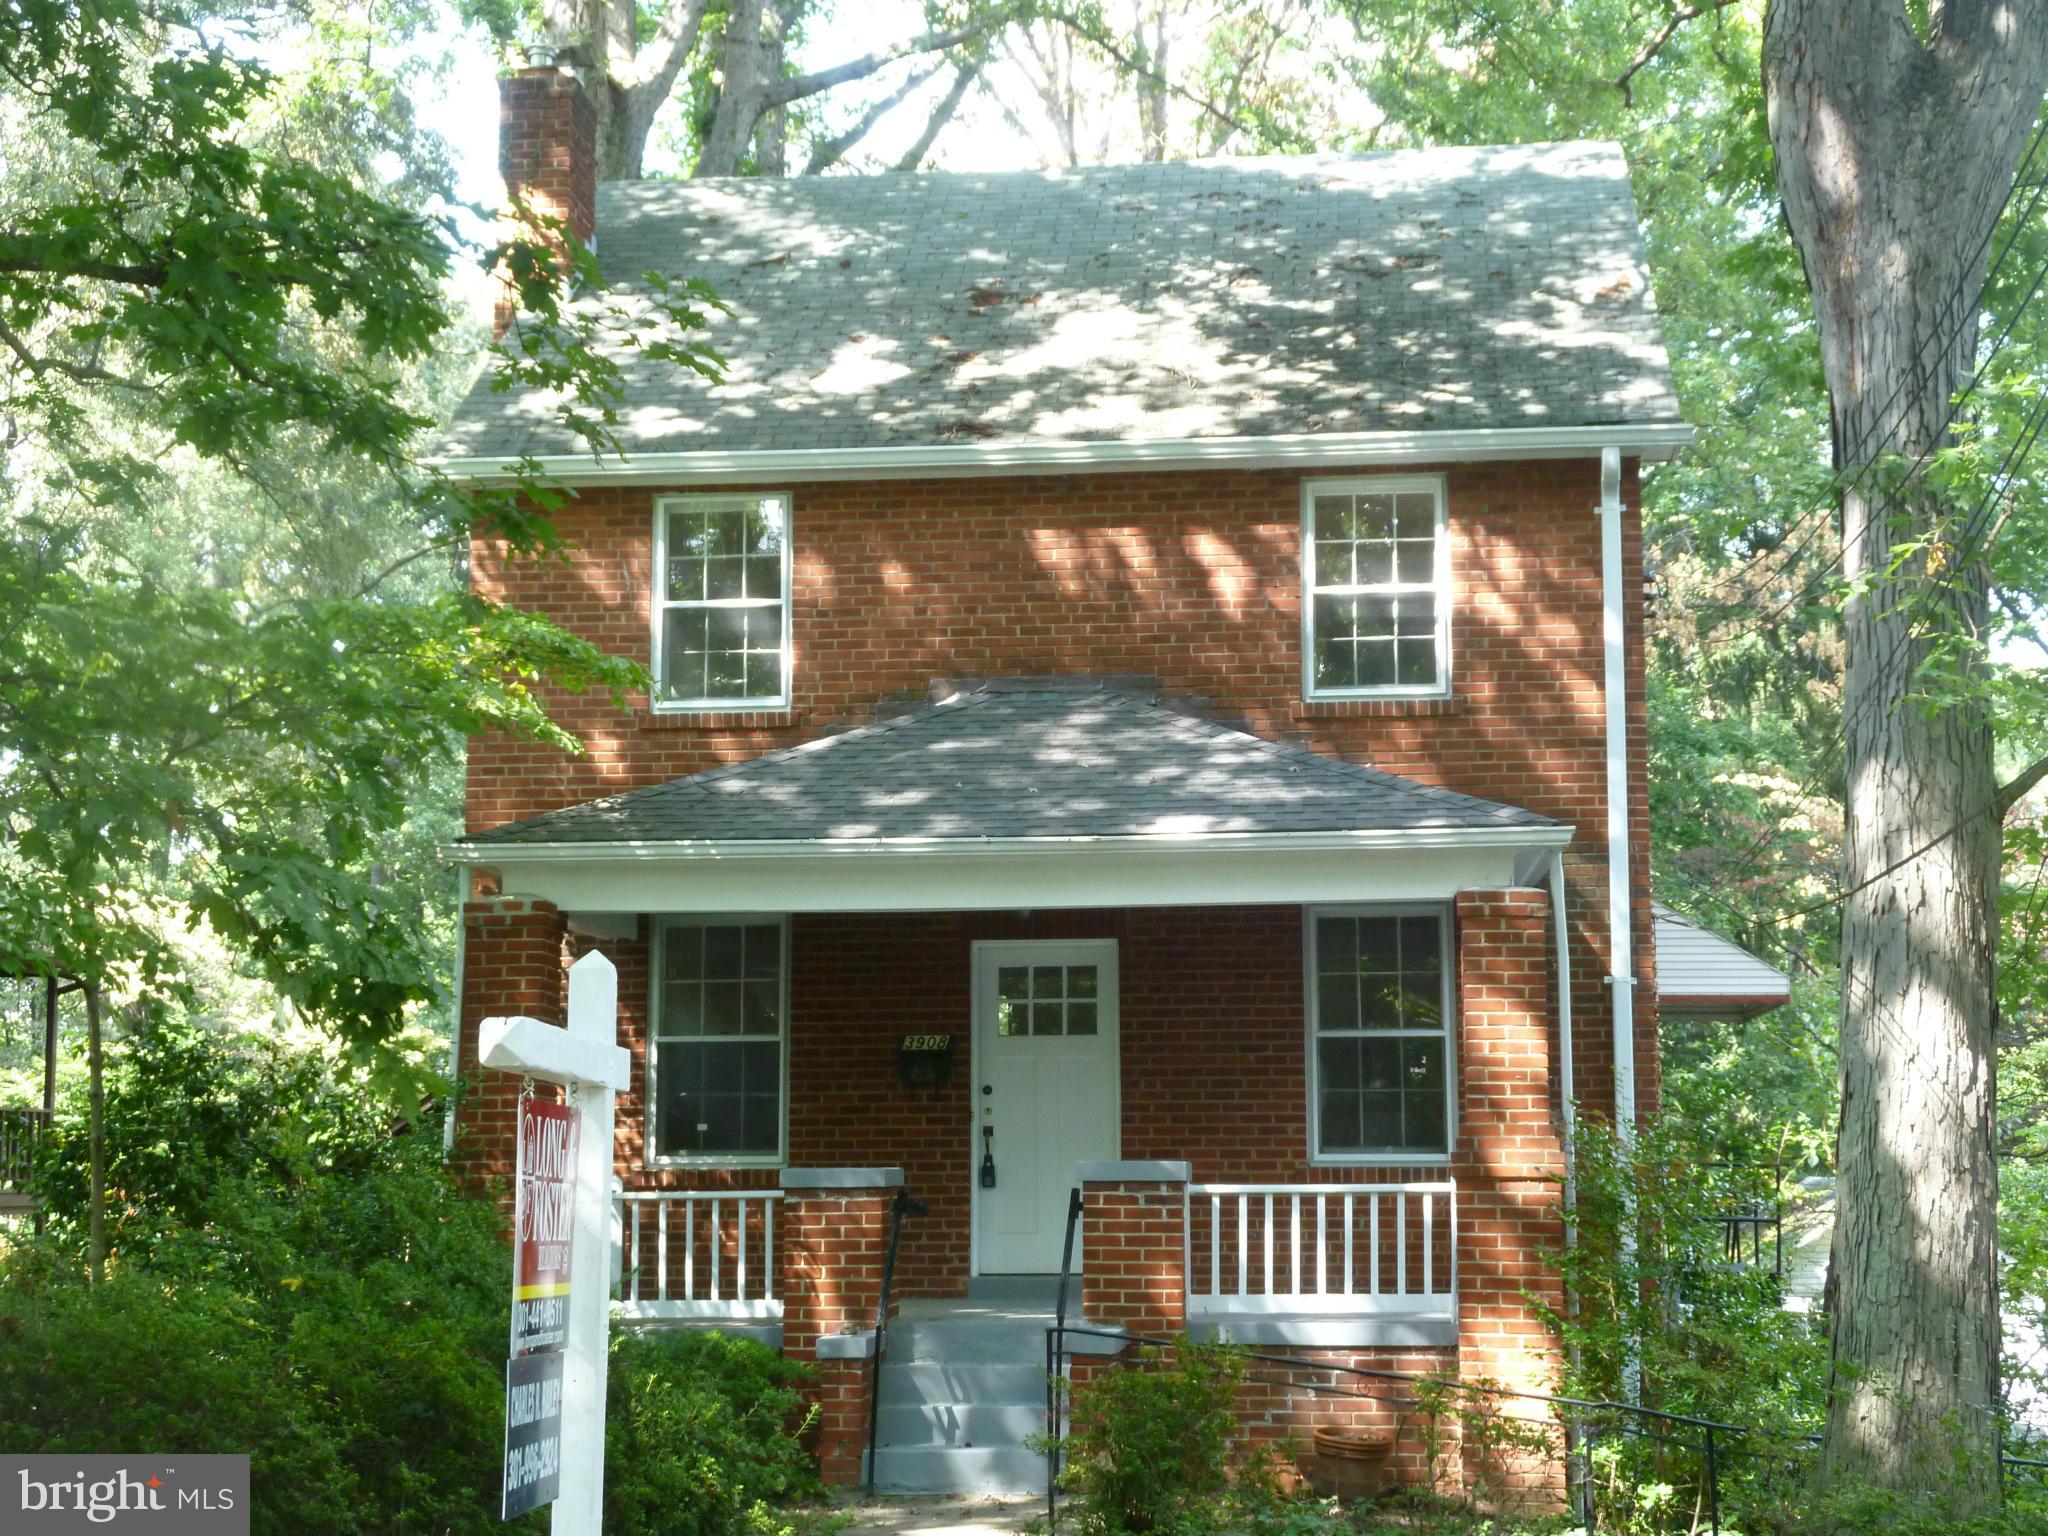 front view of house with a tree